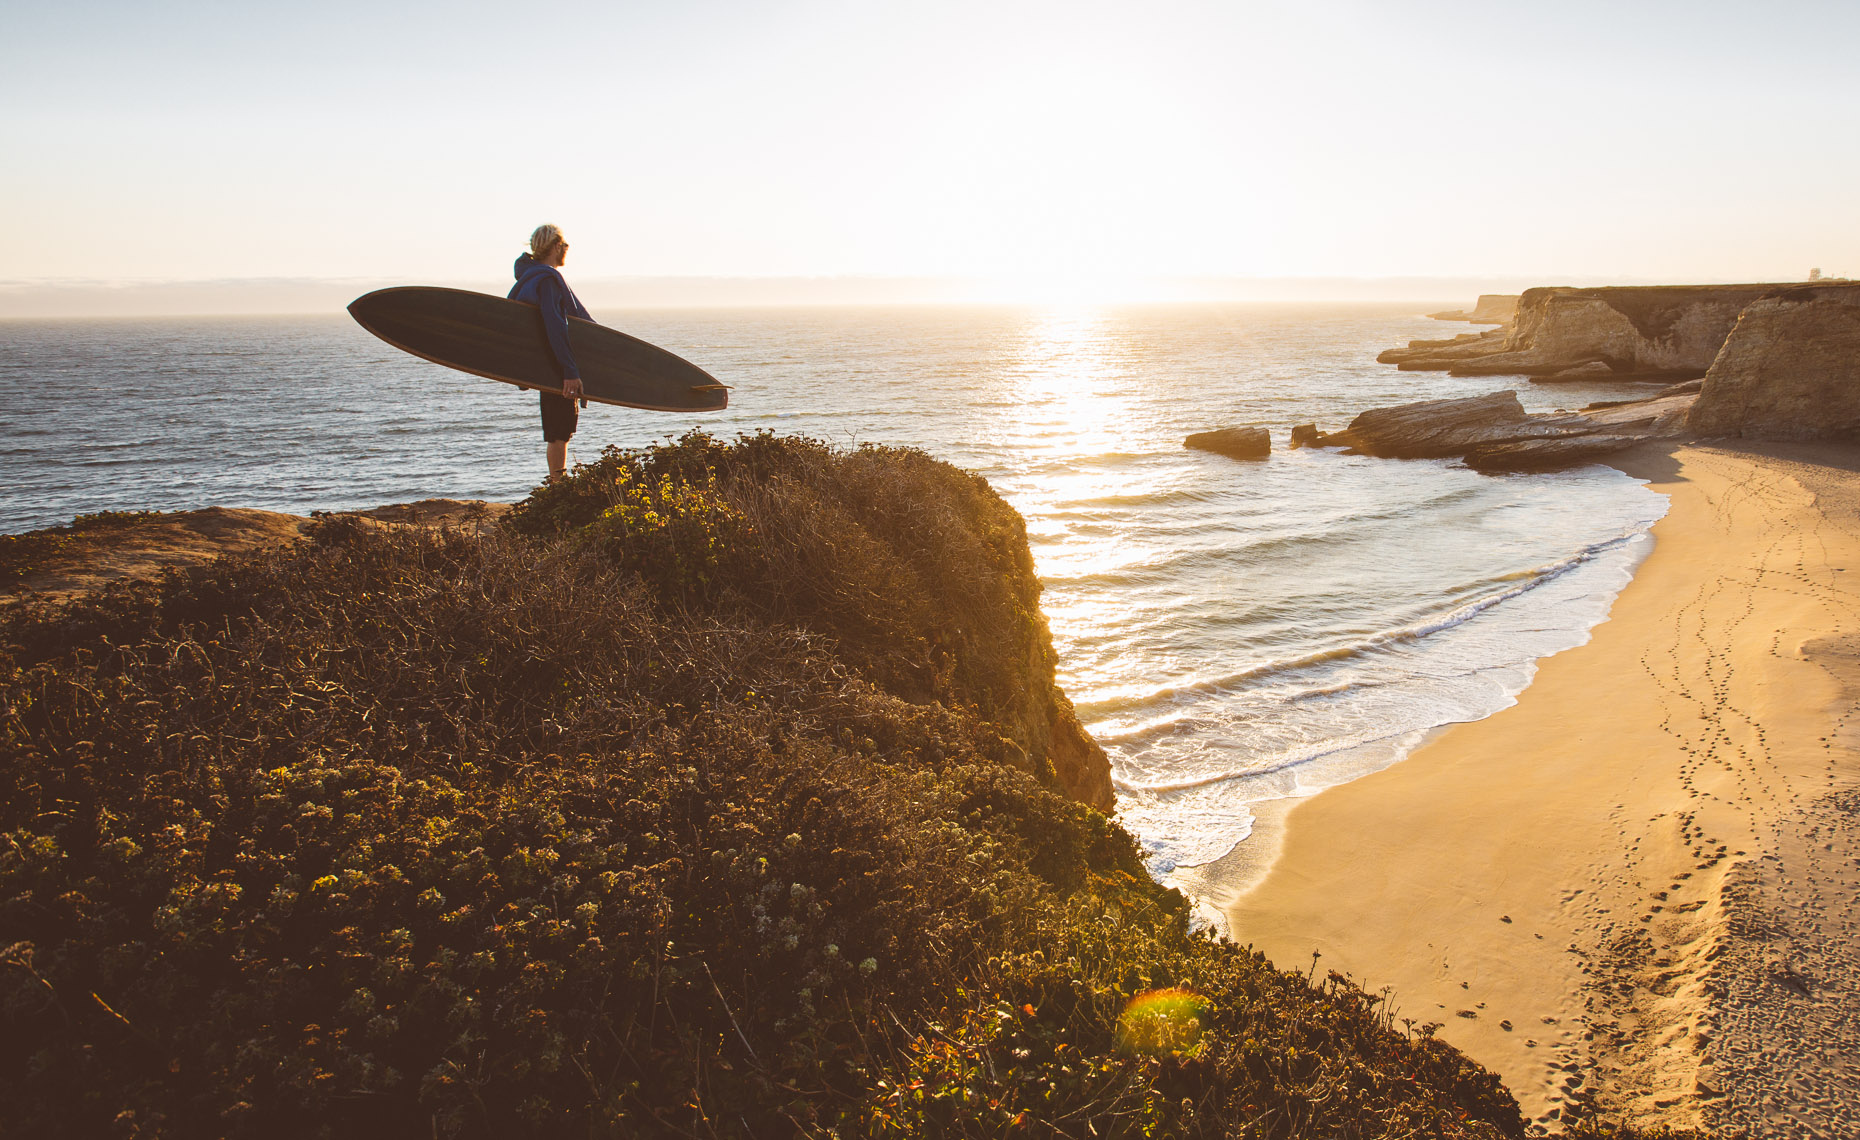 A surfer standing at the edge of a cliff overlooking the surf break at the beach, carrying a wooden longboard built by Martijn Stiphout from Ventana Surfboards